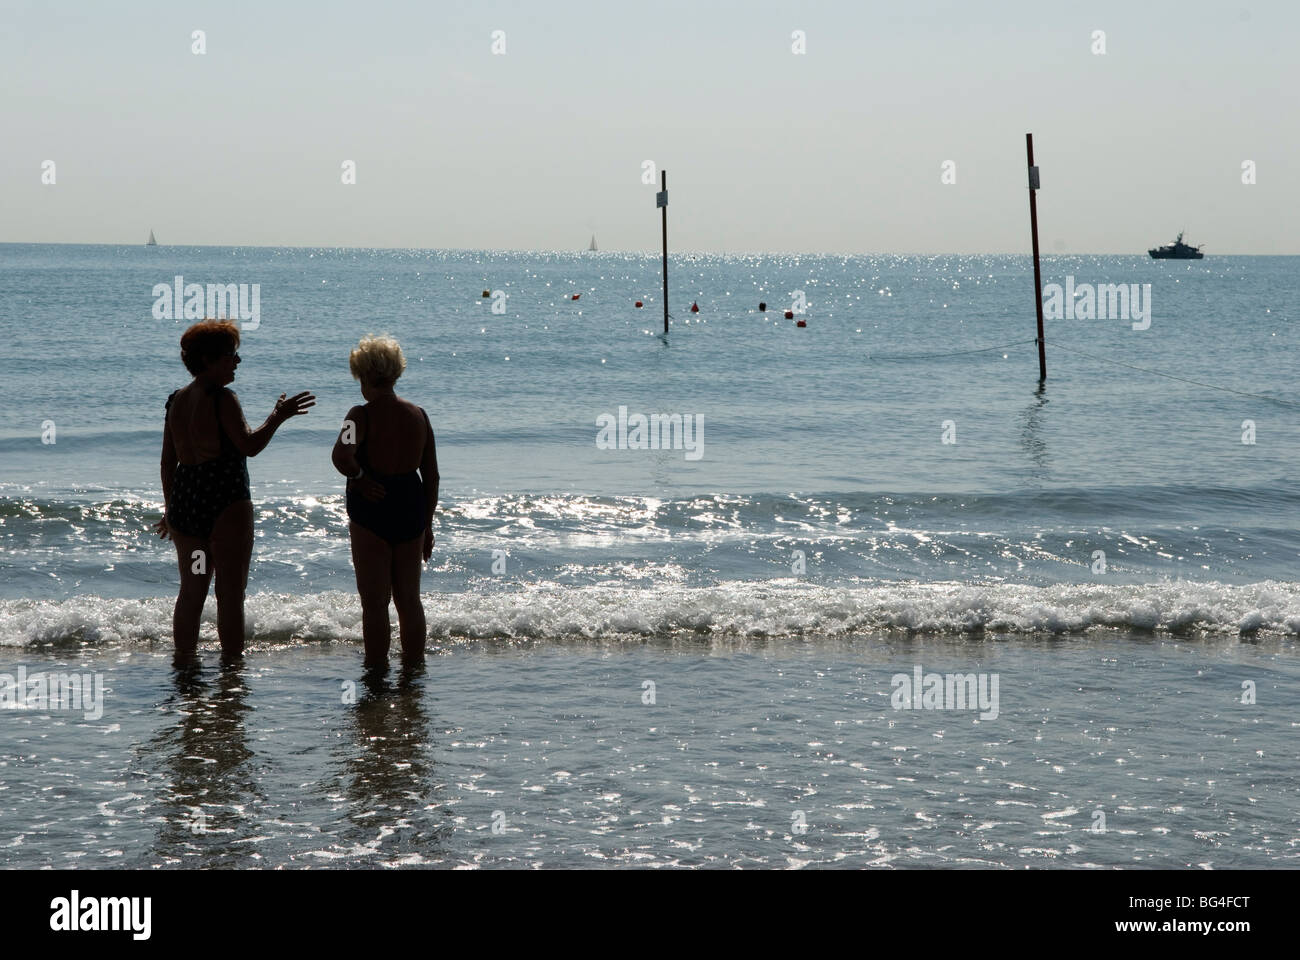 Venice Lido Adriatic sea the public beach. Two older woman chatting alone in the sea, on holiday. Venice Italy  2000s 2009 HOMER SYKES Stock Photo